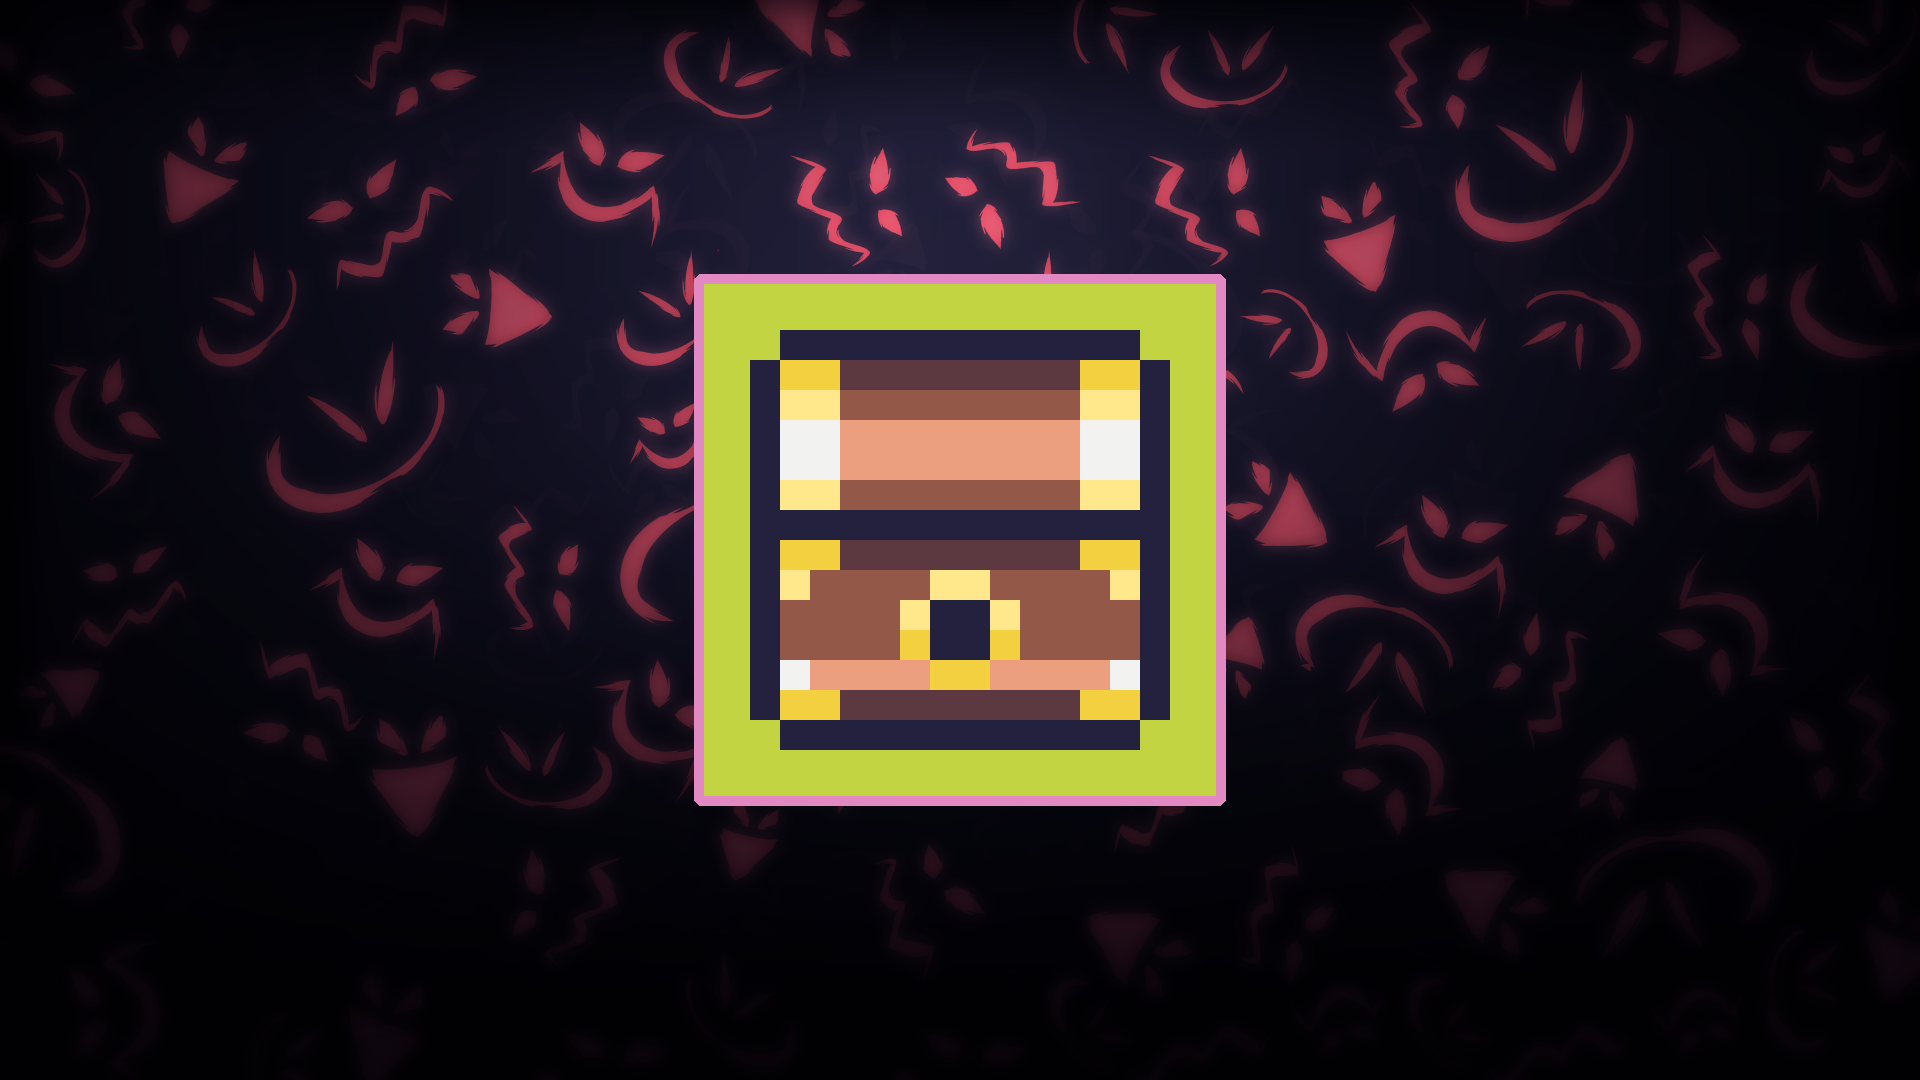 Icon for Treasure chest, nice!